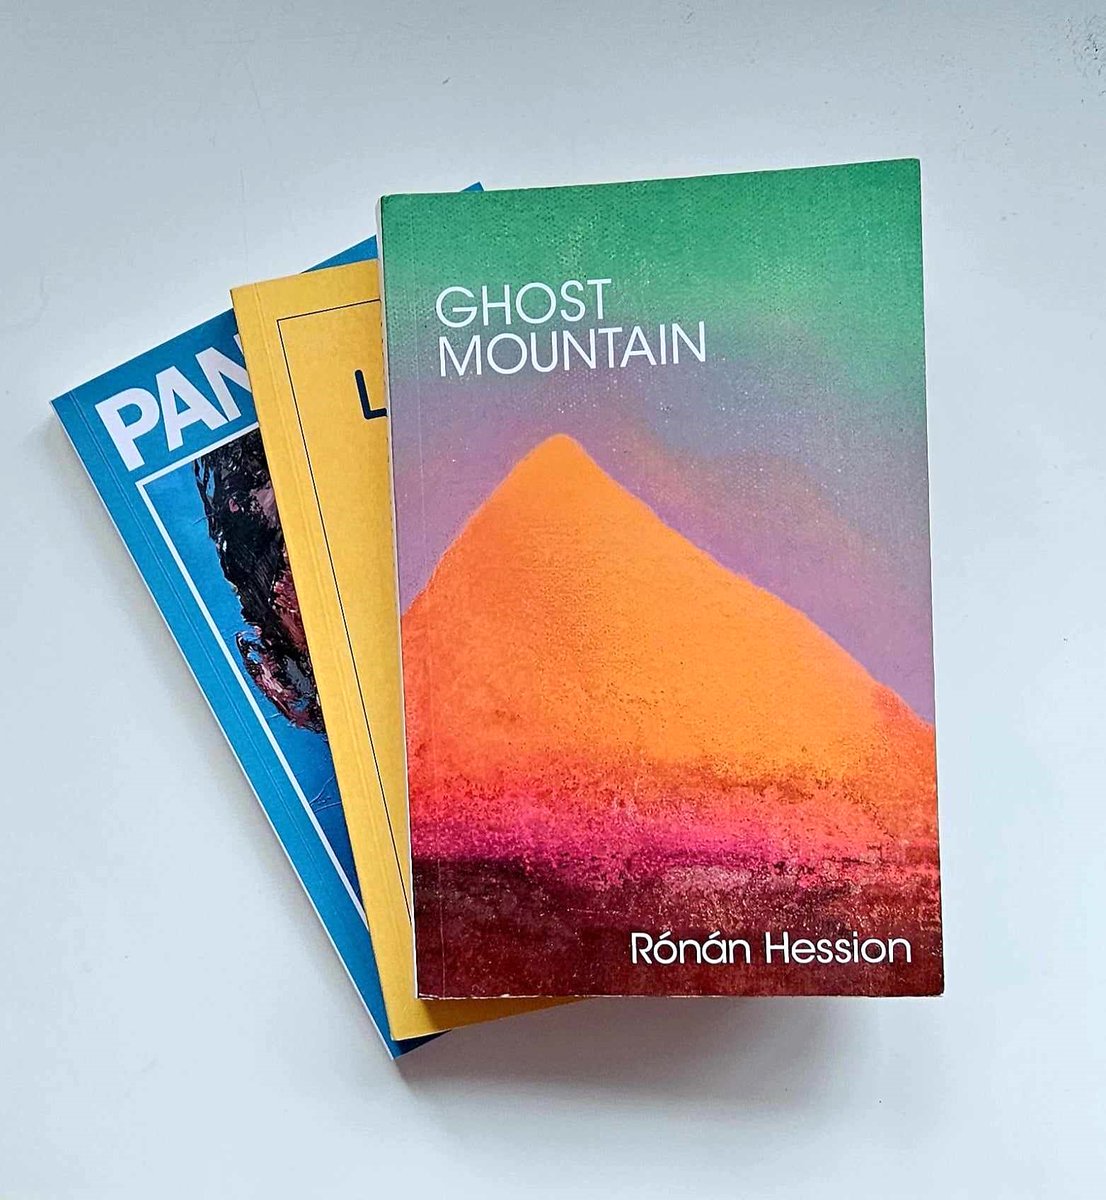 #BookReview #GhostMountain by Rónán Hession (@MumblinDeafRo) An unconventional & quite remarkable novel Compassionate and astute Officially pub May 23rd w/ @Ofmooseandmen (but popping up in bookshops!) #TuesdayBookBlog swirlandthread.com/review-ghost-m…